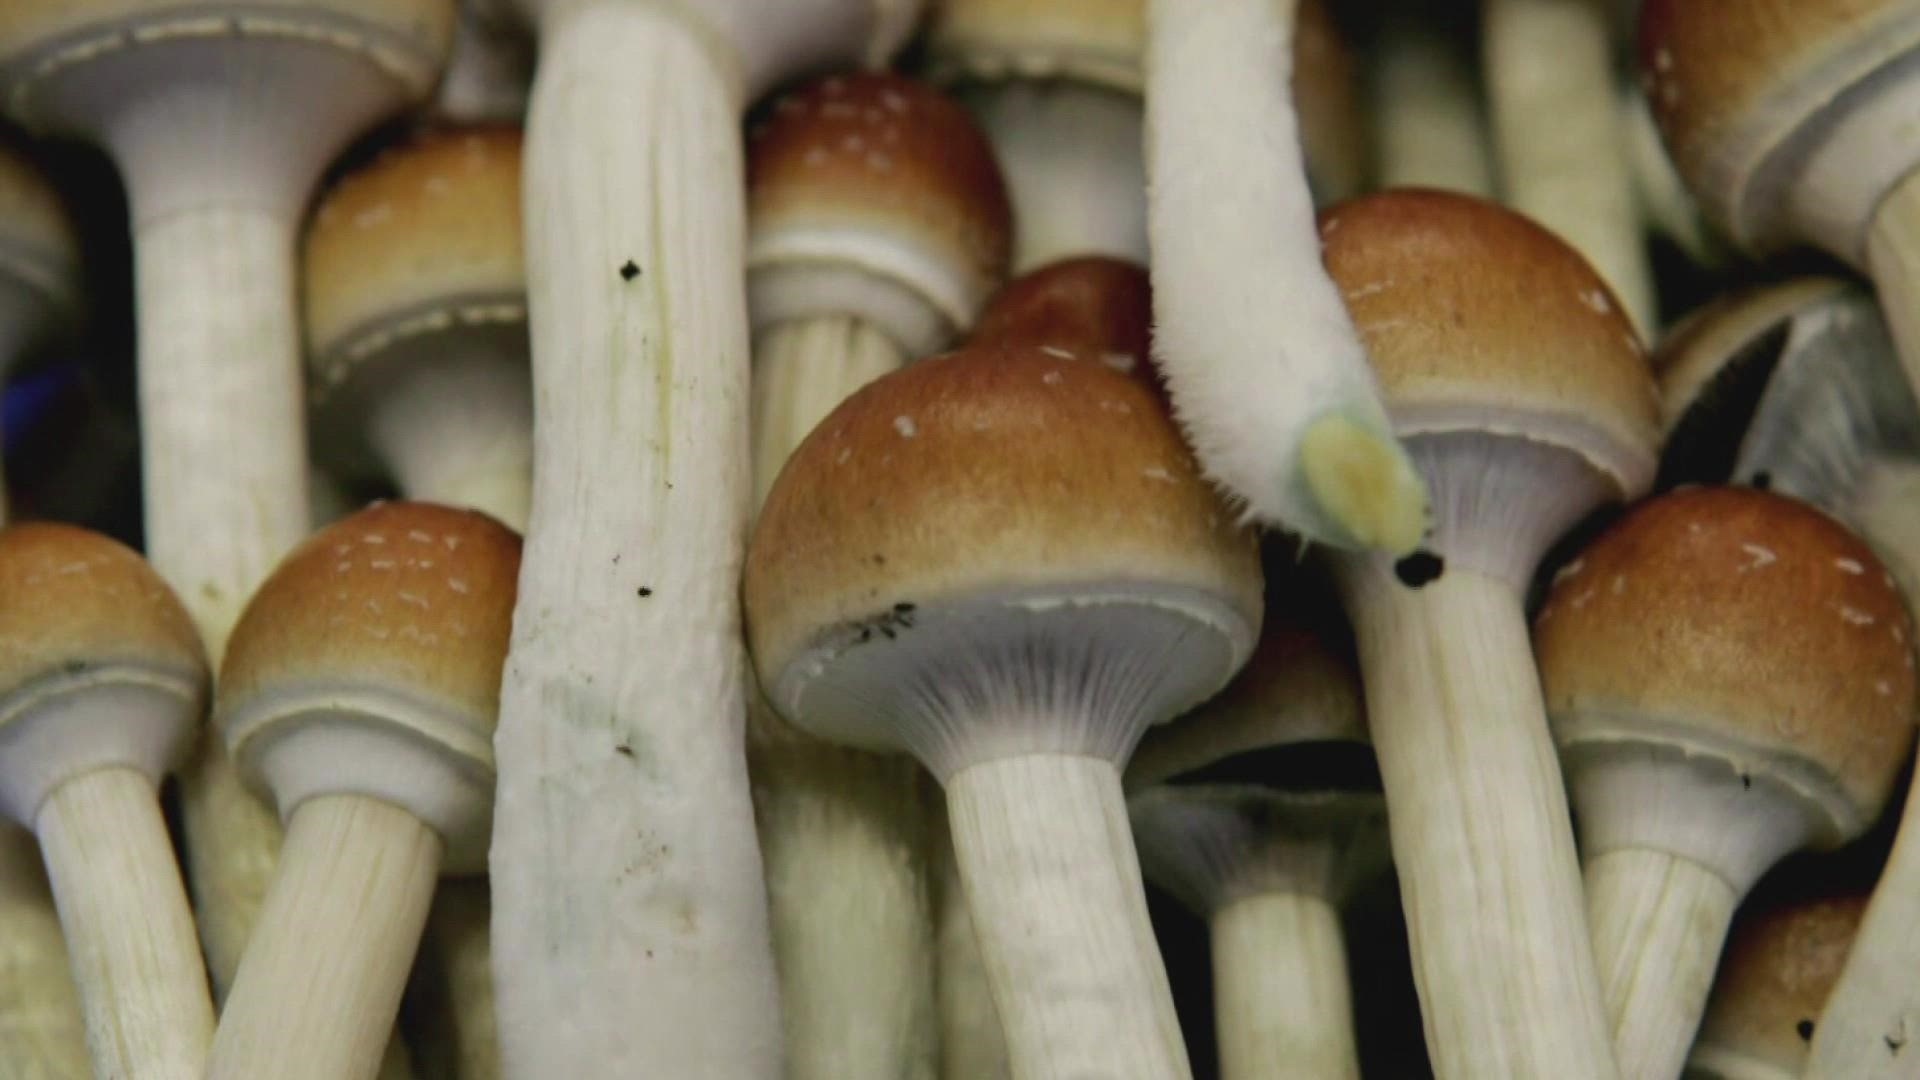 Seattle's UW Medicine To Study Effects Of Psilocybin On Stressed Out Healthcare Workers